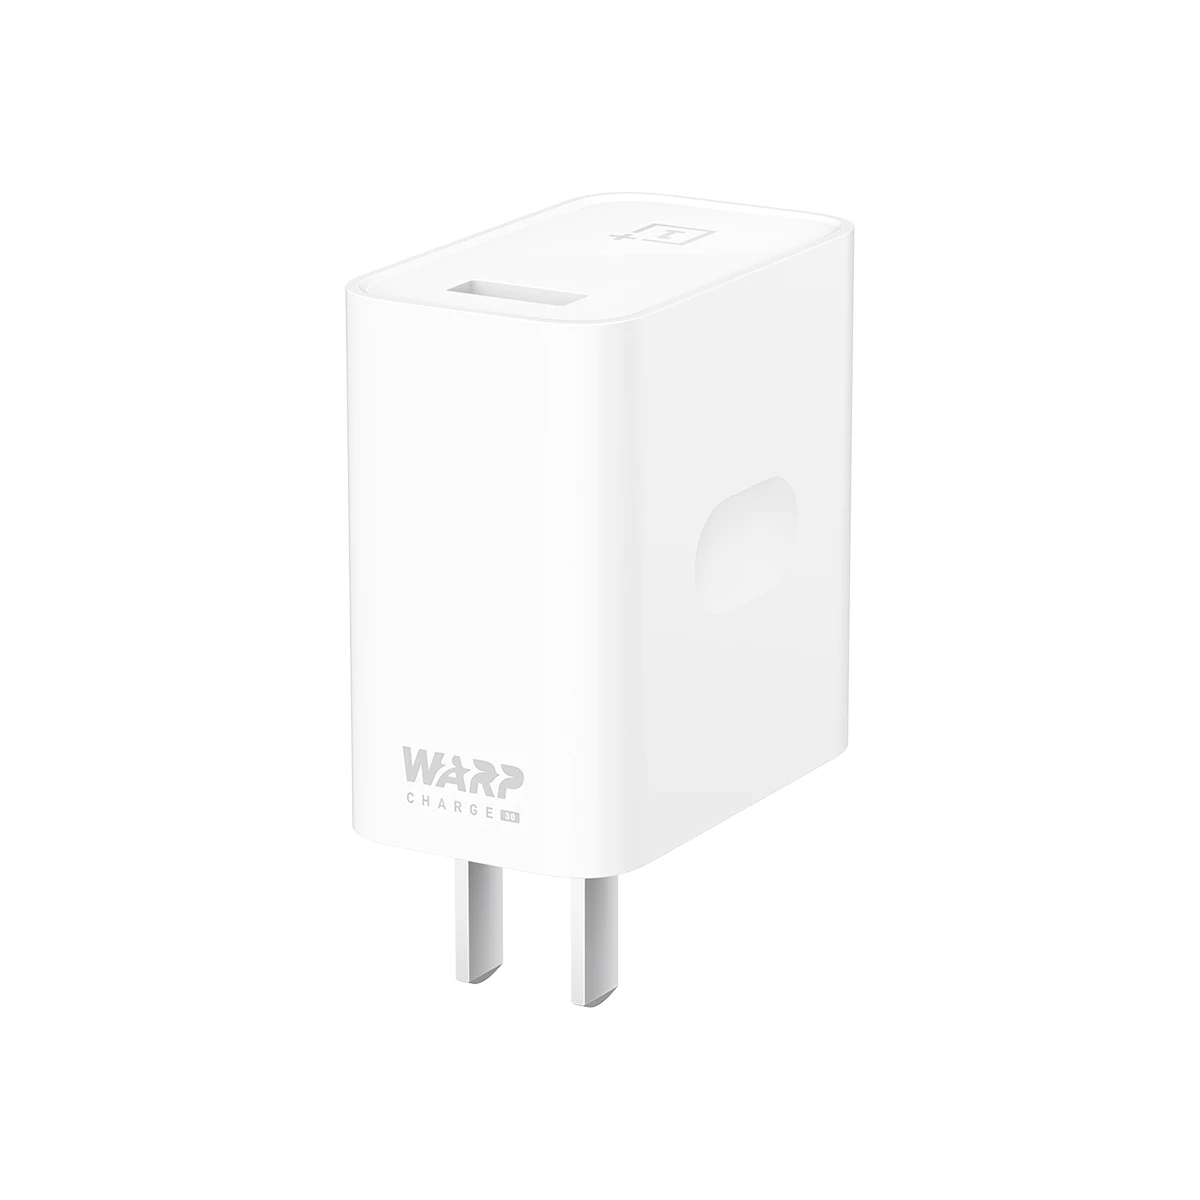 OnePlus 30W Warp Charge USB Wall Charger Adapter For OnePlus 8 OnePlus 8 Pro for iPhone 11 SE 2020